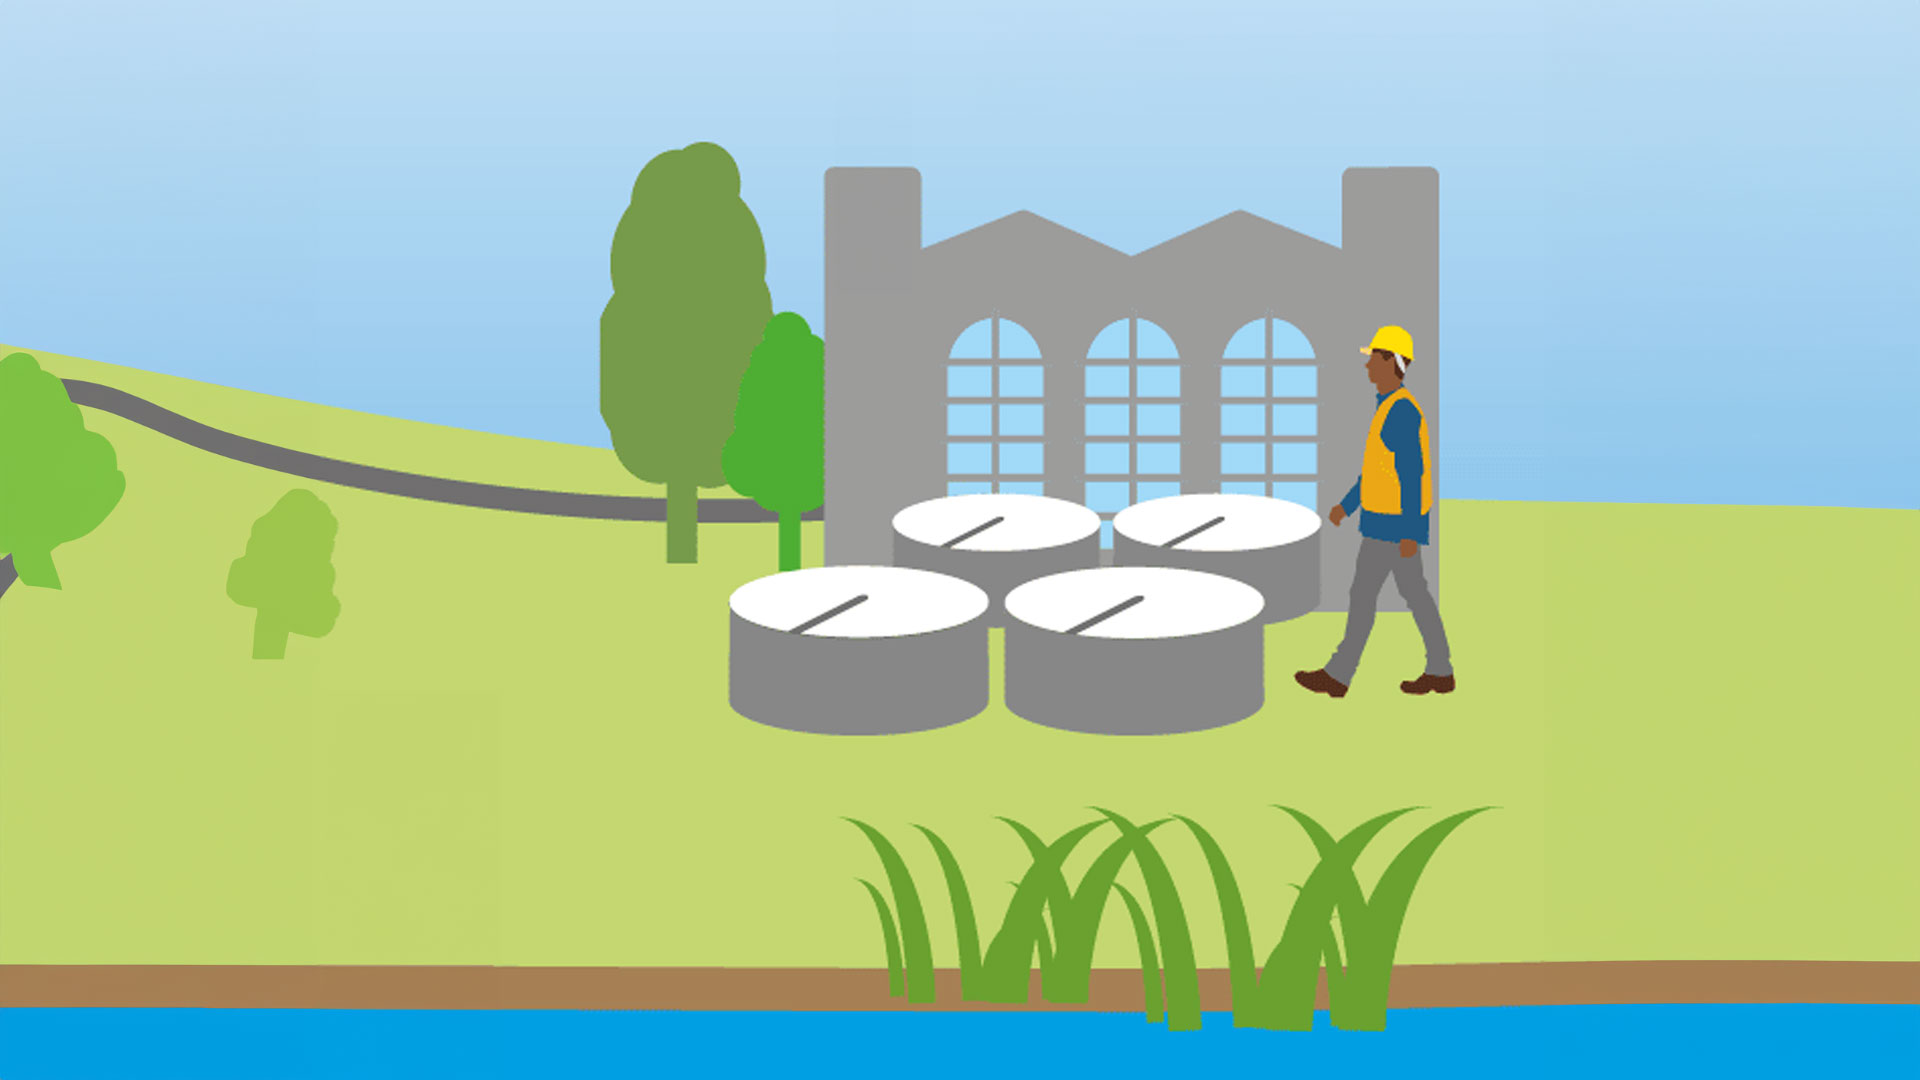 Simple illustration of a water treatment plant